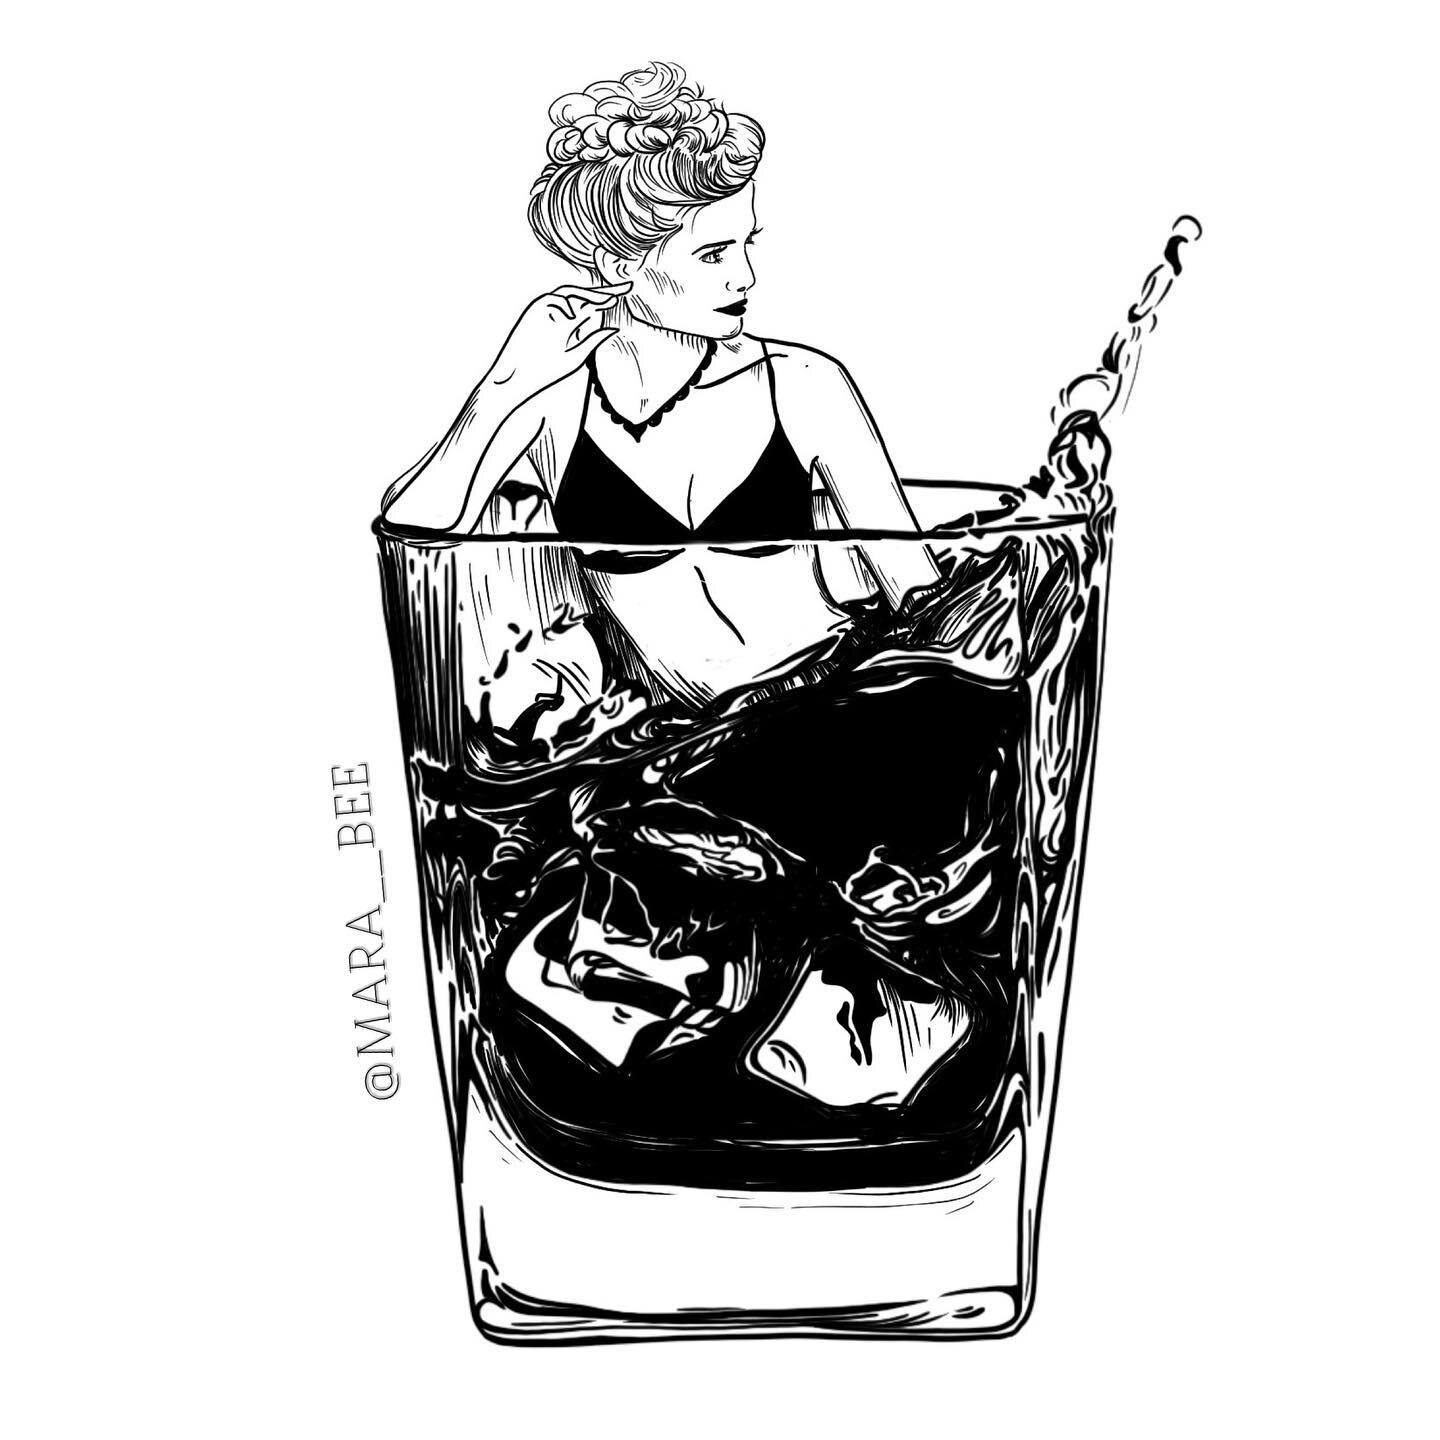 The ✨Dream ✨
&bull;
&bull;
#pick up a tattoo pass from the shop if you want to get her inked 🖤
&bull;
&bull;
&bull;
&bull;
&bull;
&bull;
&bull;
&bull;
#pinupgirl #modernpinup #whiskeytattoo #whiskey #whiskeyglass #pinuptattoo #minimalisttattoo #vice